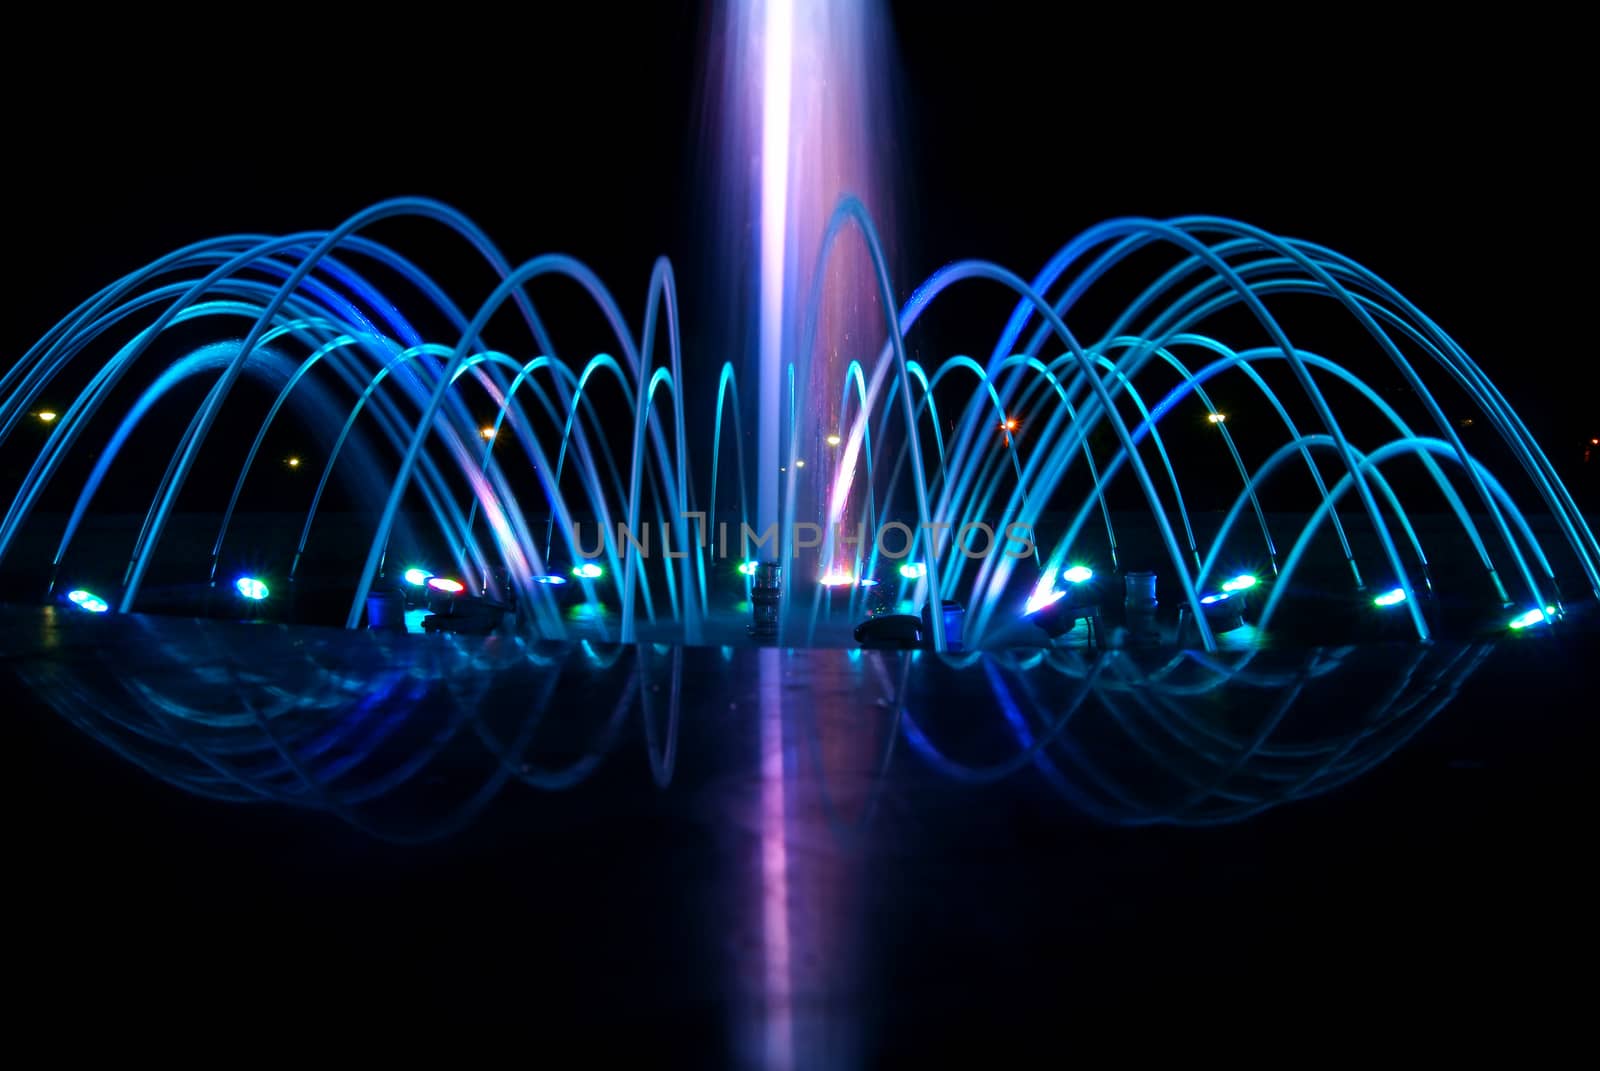 Dancing fountain at night by 4dcrew